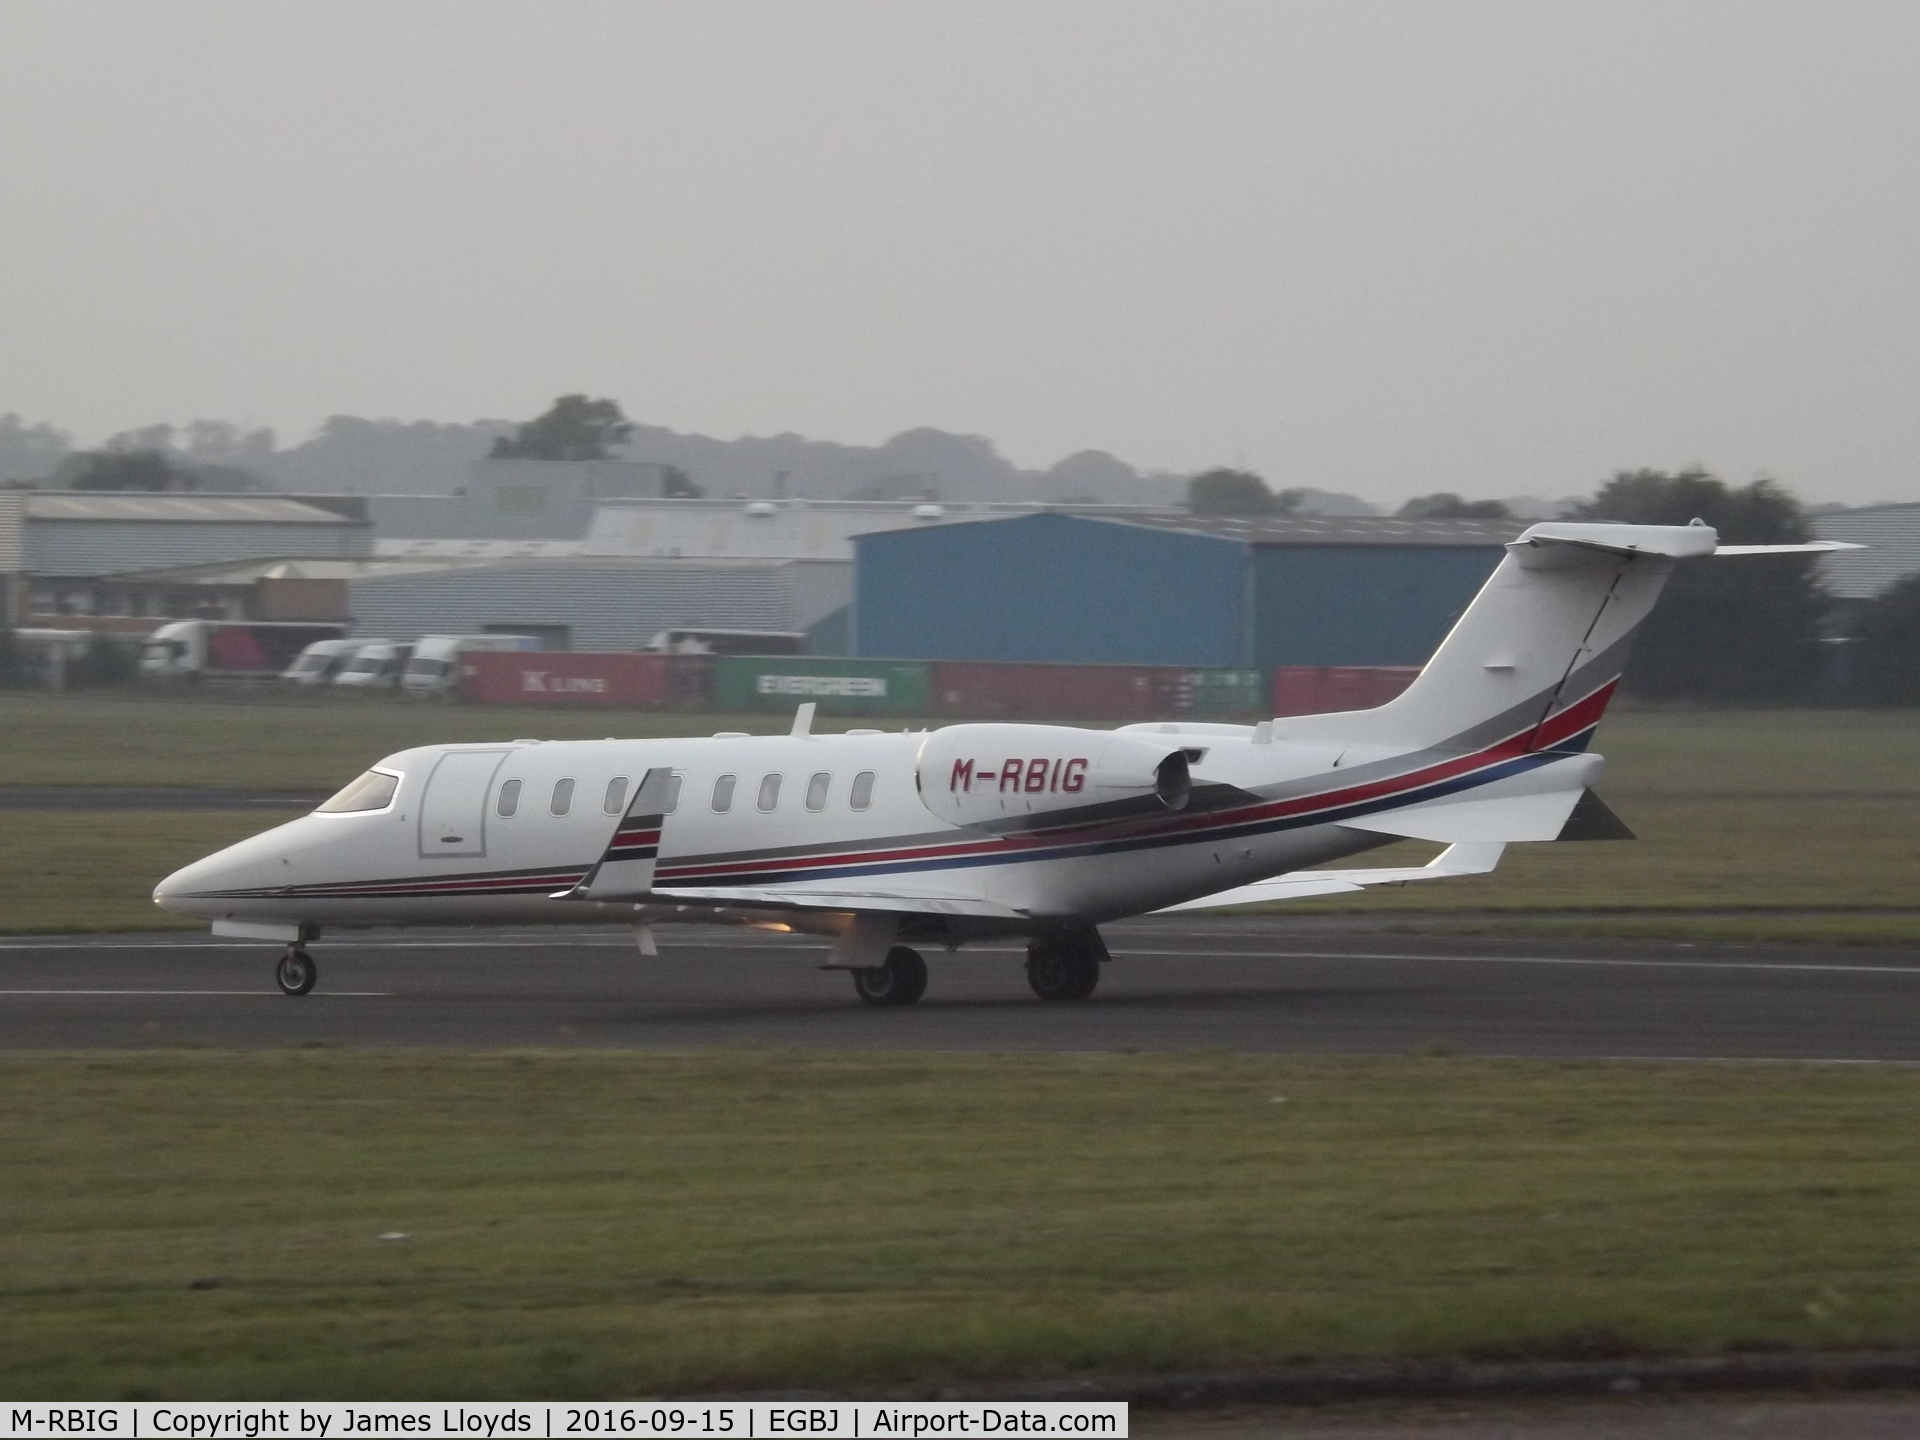 M-RBIG, 2005 Learjet 45 C/N 45-280, Takeing off runway 27 At Gloucestershire Airport.